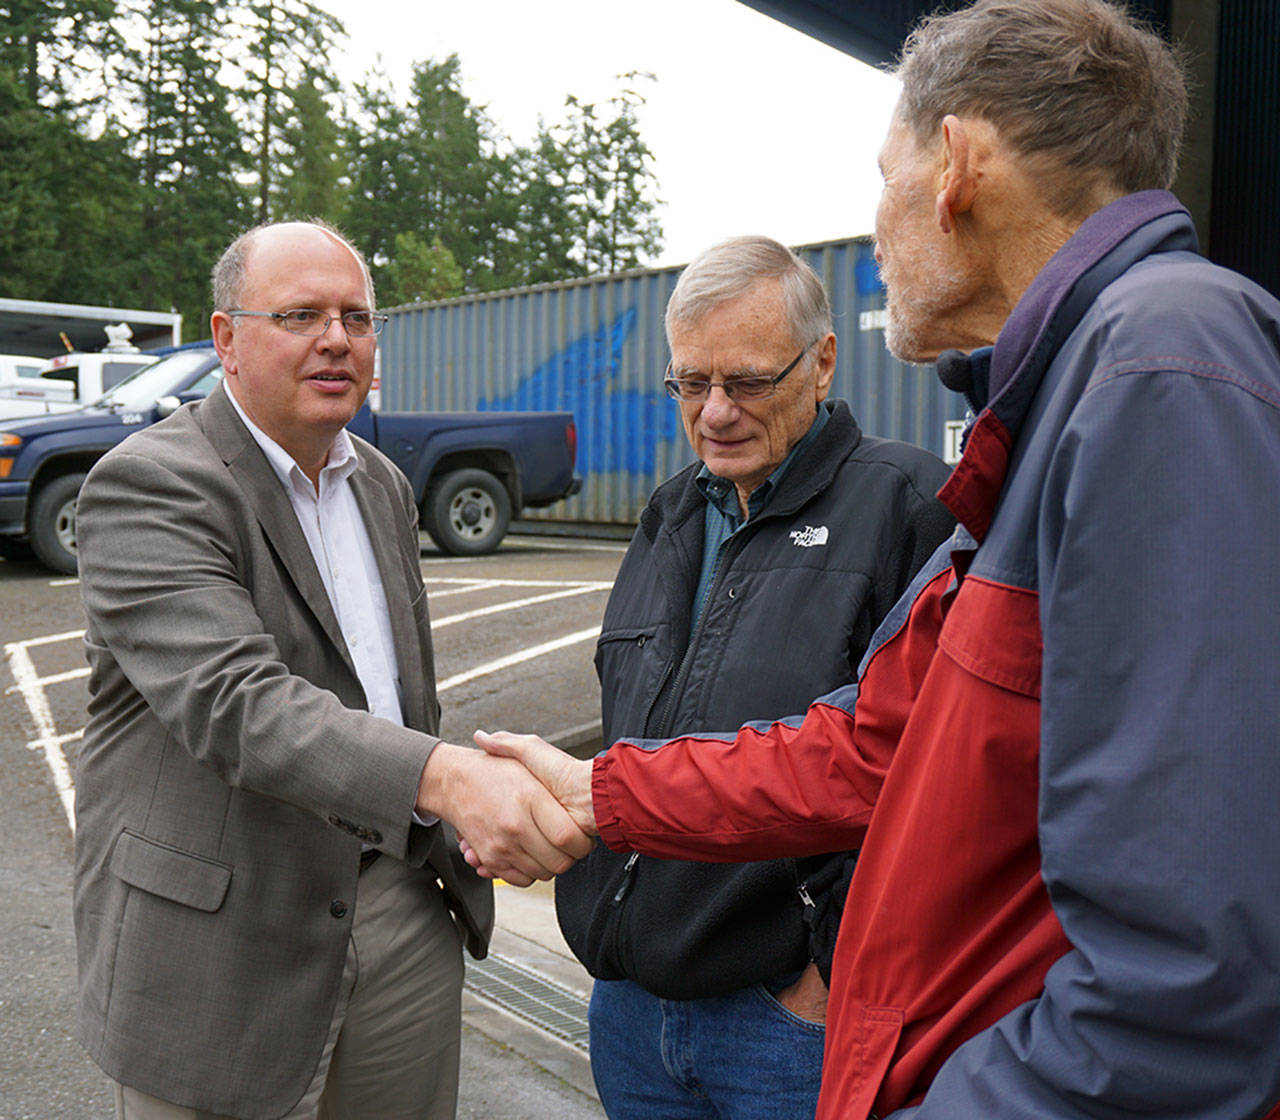 Jefferson County Public Utillity District’s General Manager Larry Dunbar, left, greets PUD Citizen Advisory Board Member Peter Lauritzen while Bill Kaune of Kala Point looks on during the PUD’s fifth anniversary celebration at the utility’s headquarters south of Port Townsend. (Jefferson County PUD)